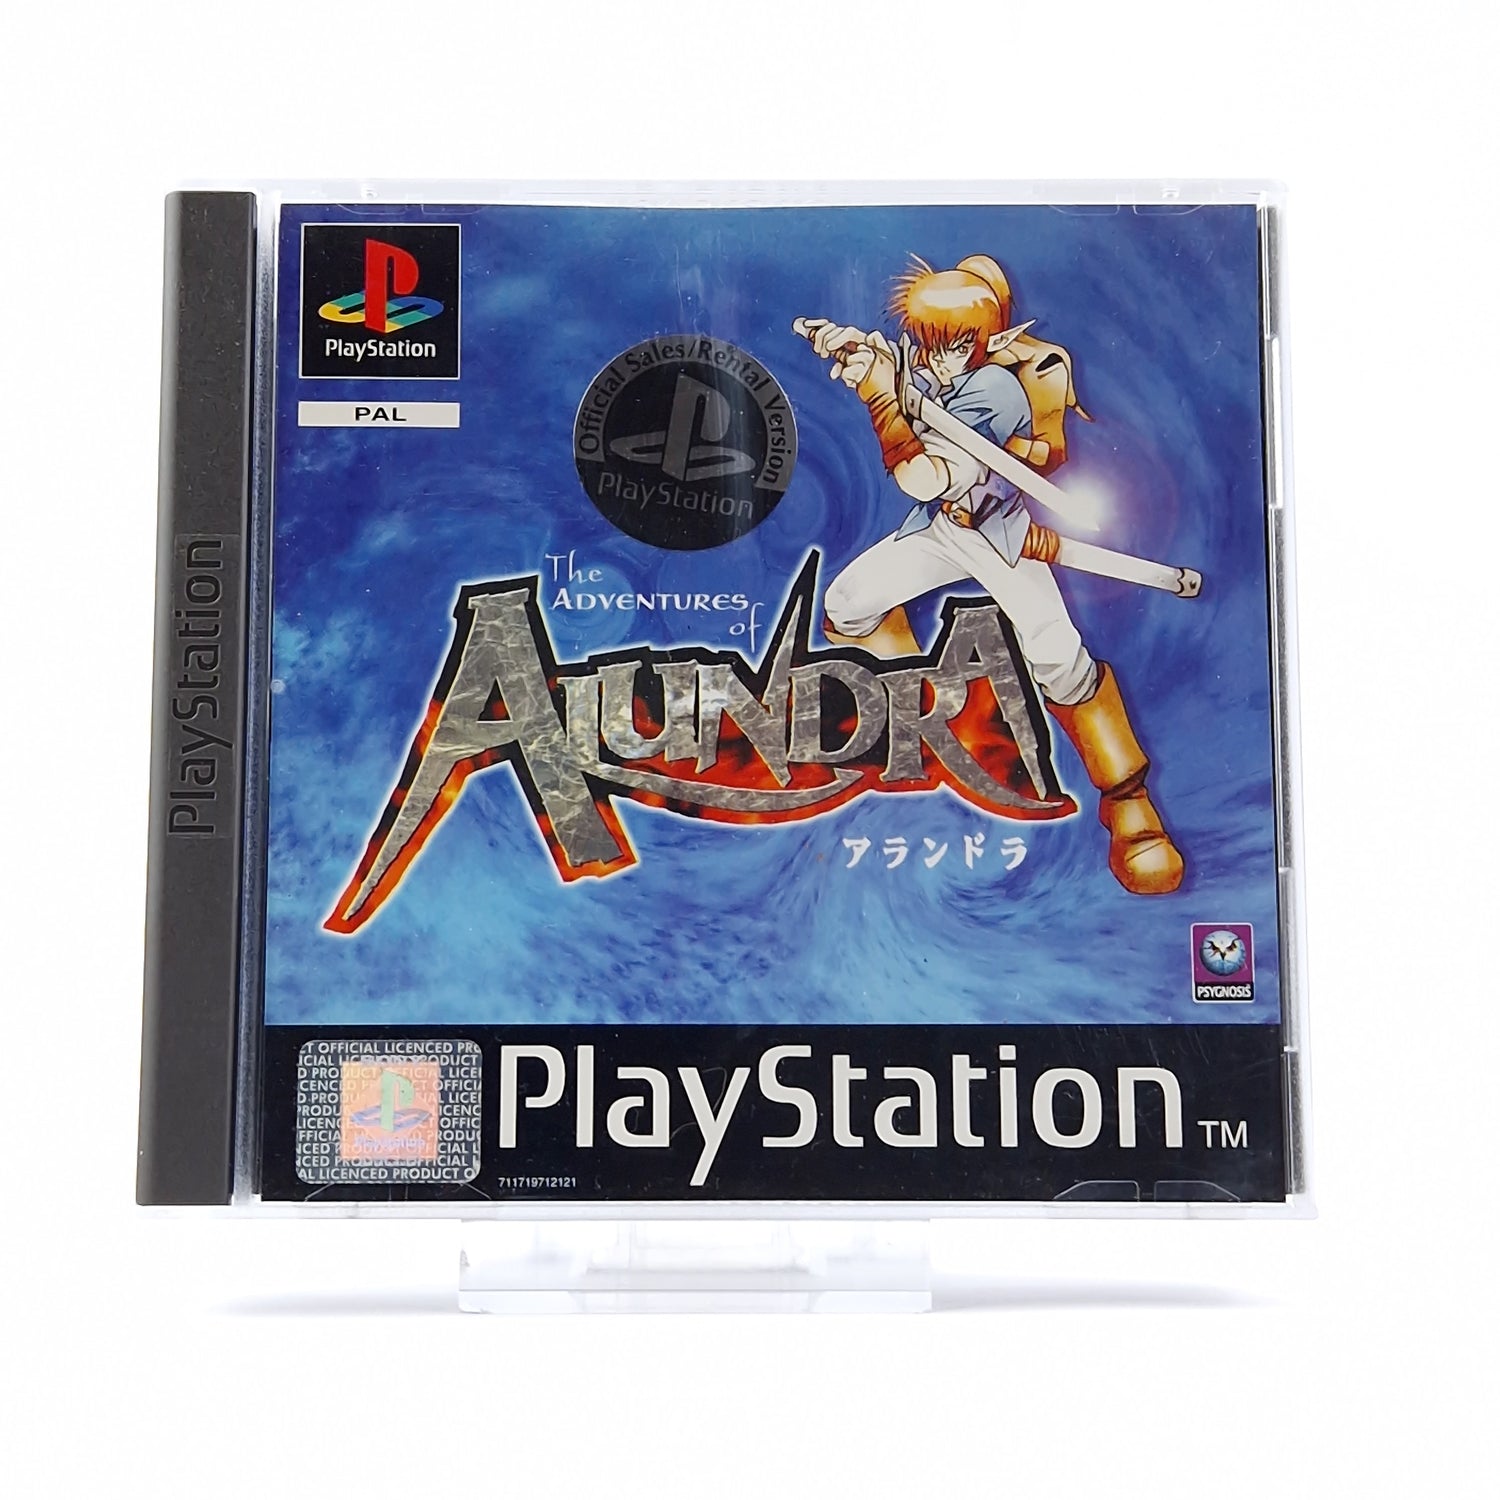 Sony Playstation 1 Game: The Adventures of Alundra - OVP CD | PAL PS1 PSX Game